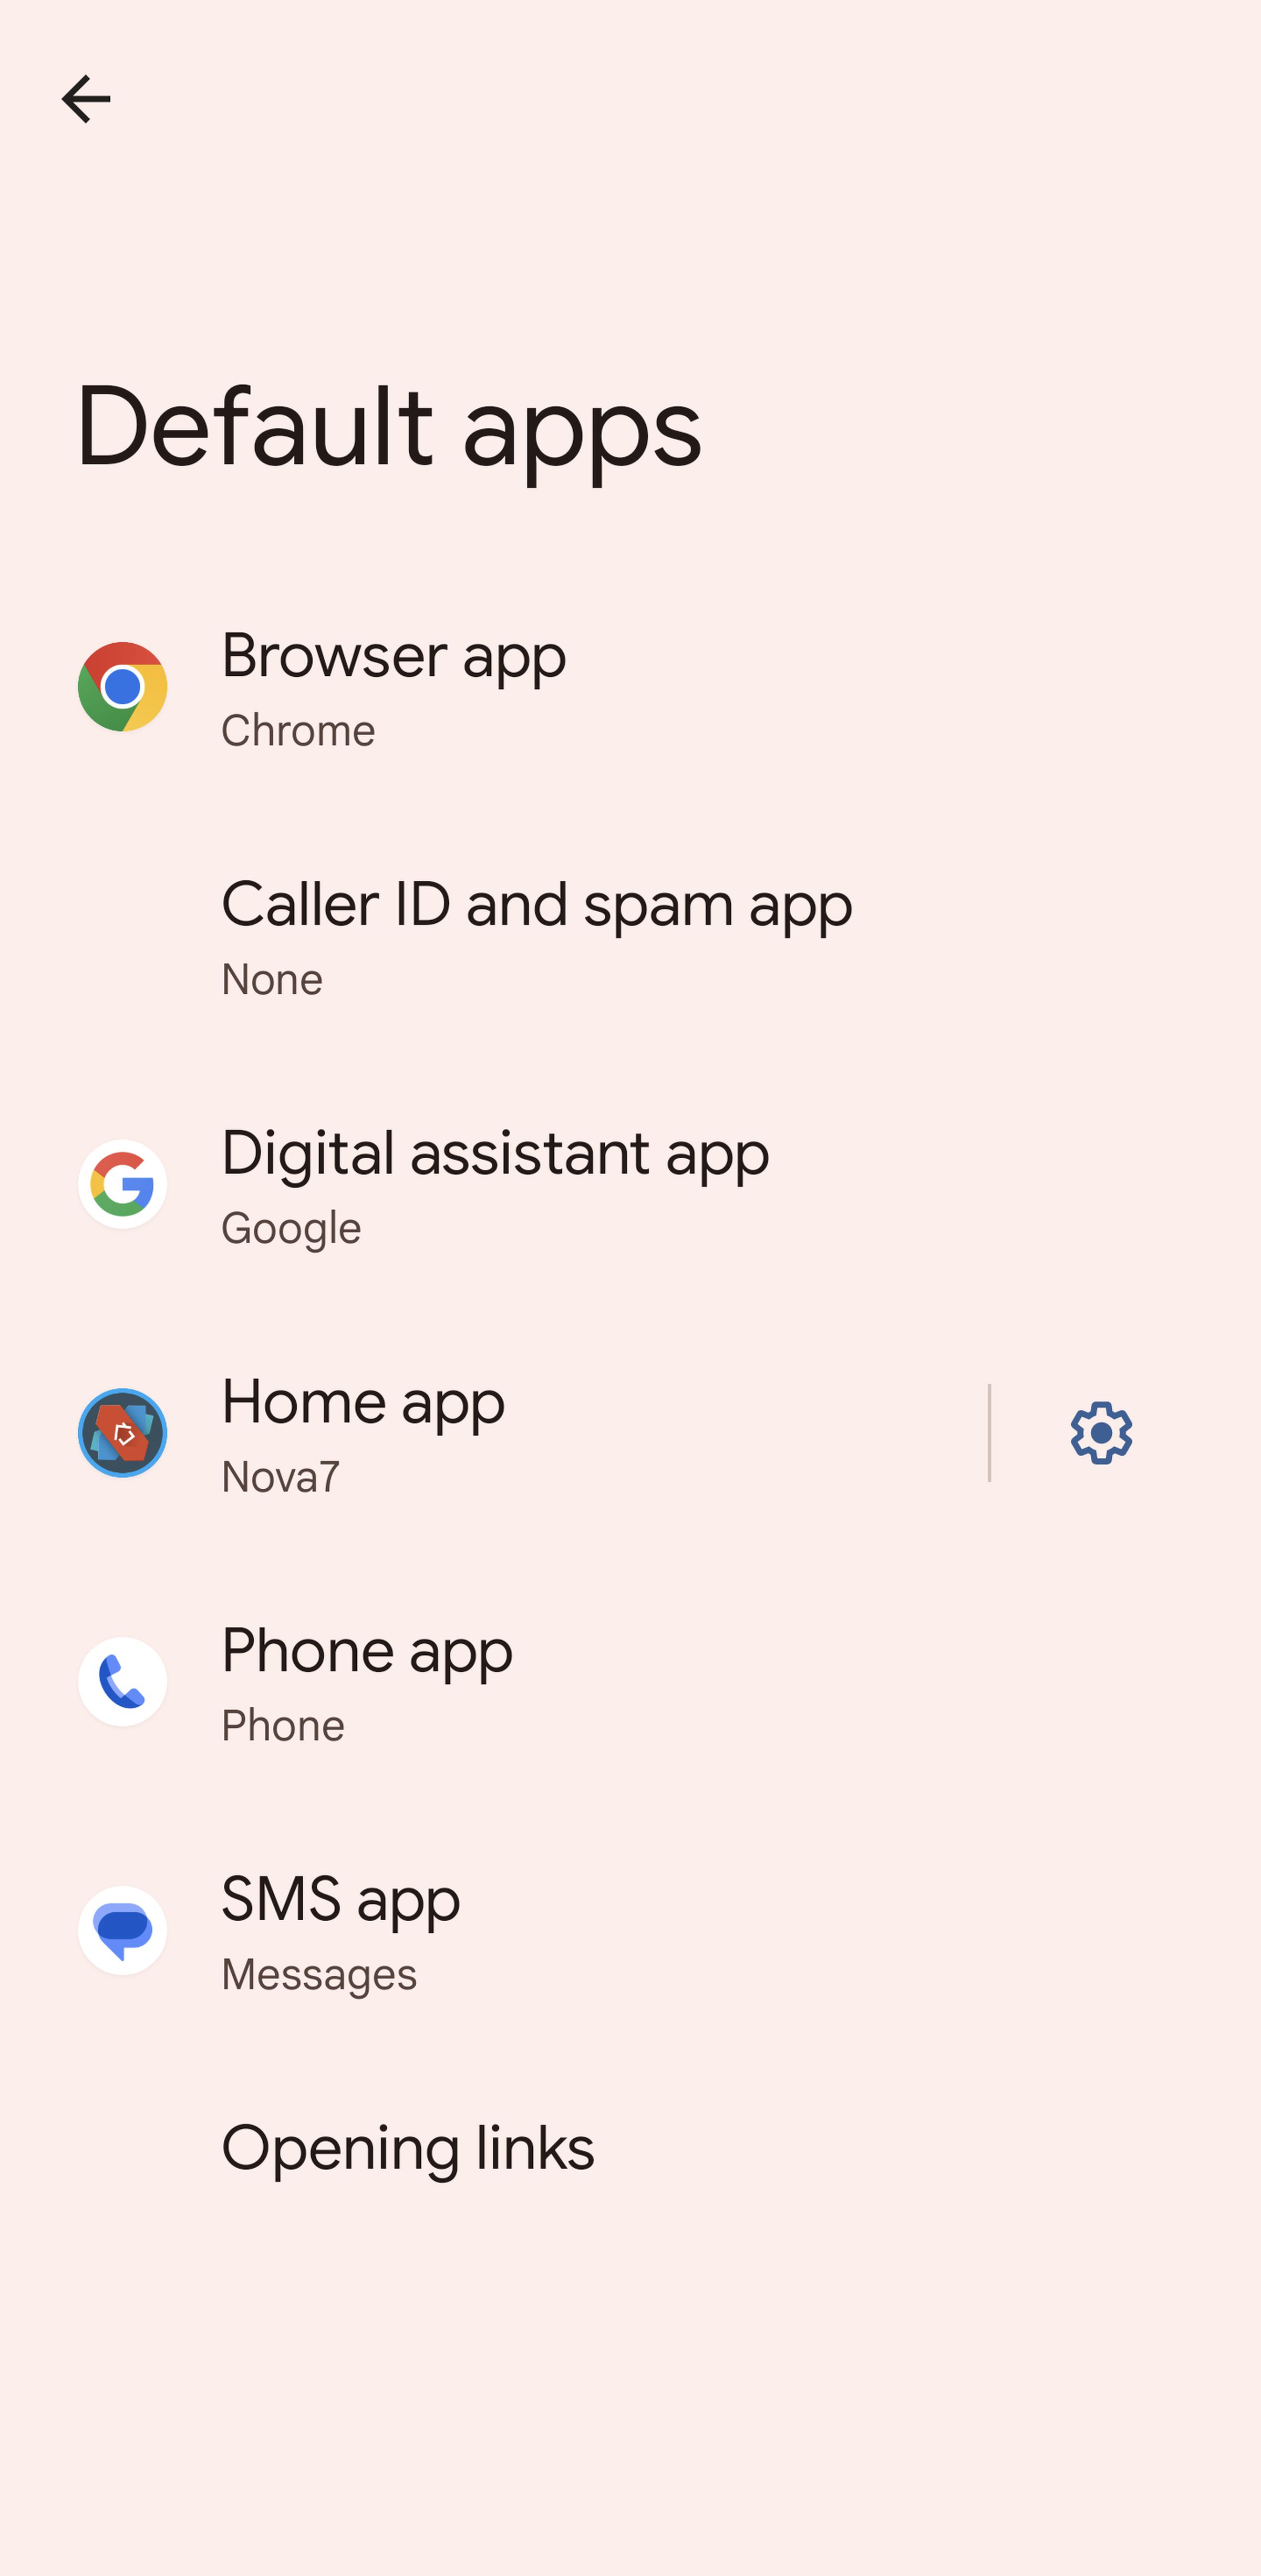 Default apps page on Android phone, listing Browser app, Caller ID and spam app, Digital assistant app, Home app, Phone app